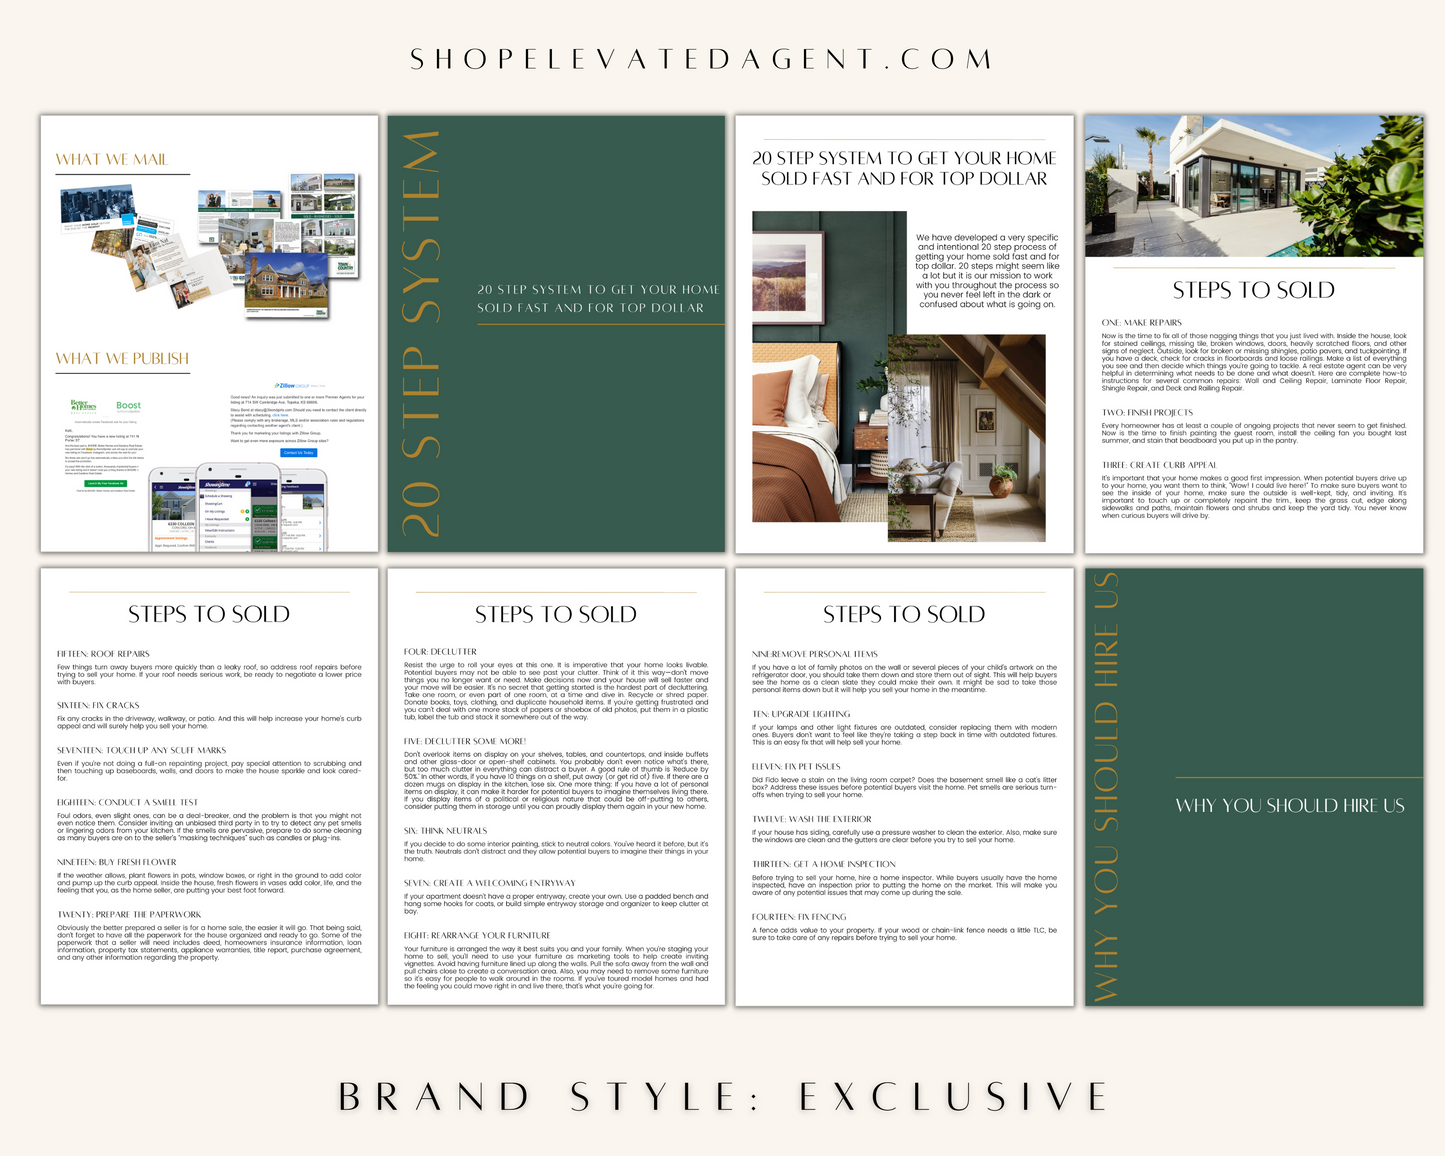 Pre-Listing Presentation Packet - Exclusive Brand Style